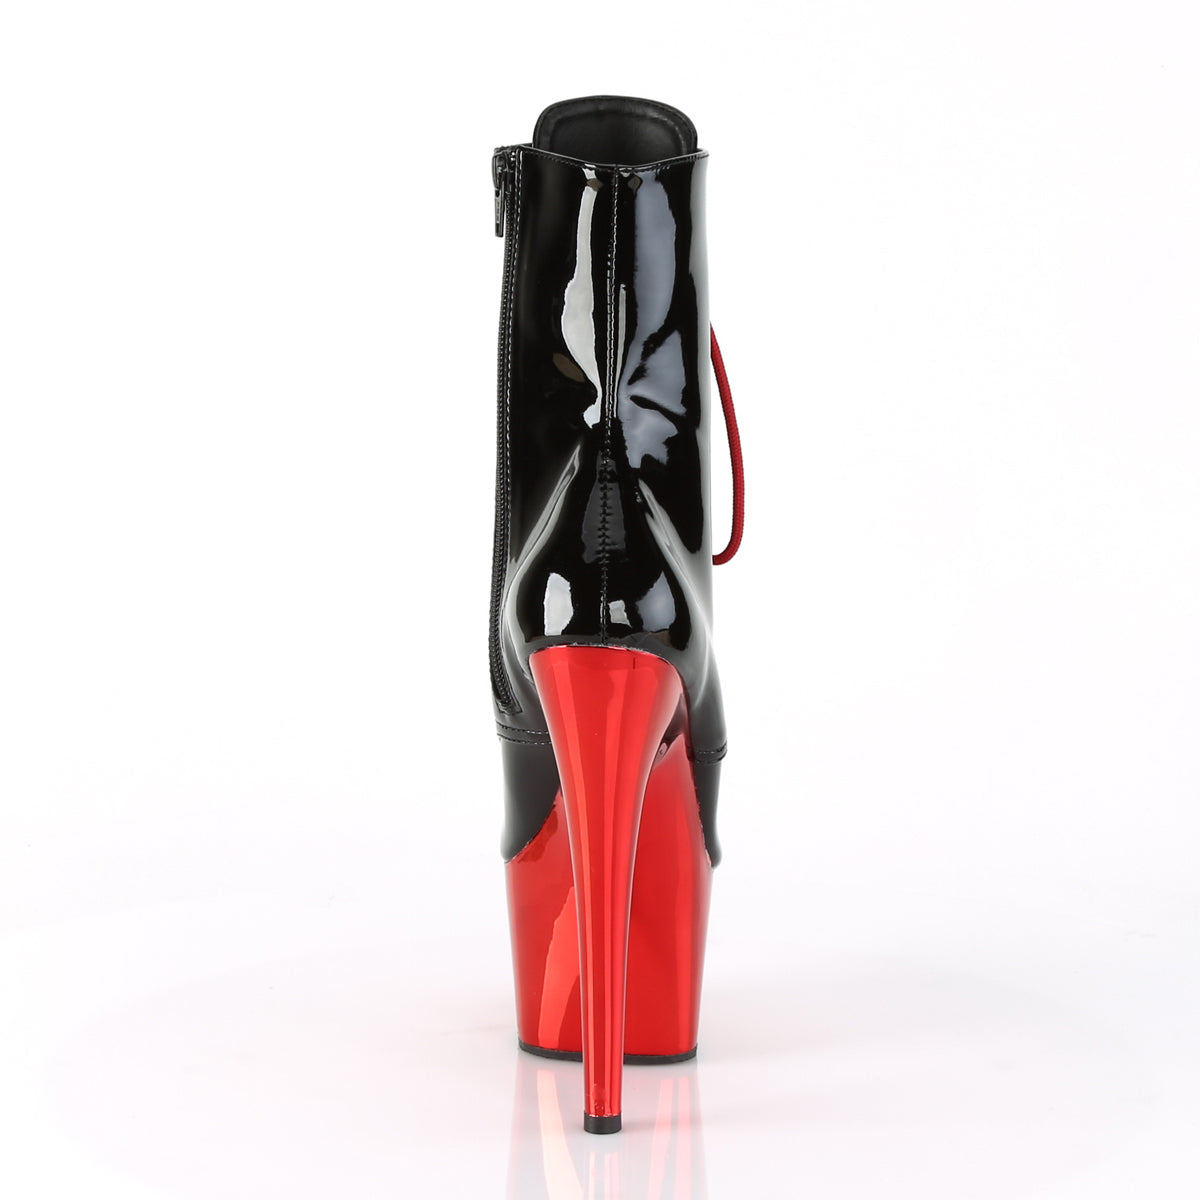 ADORE-1020 Pleaser Black Patent/Red Chrome Platform Shoes [Sexy Footwear]